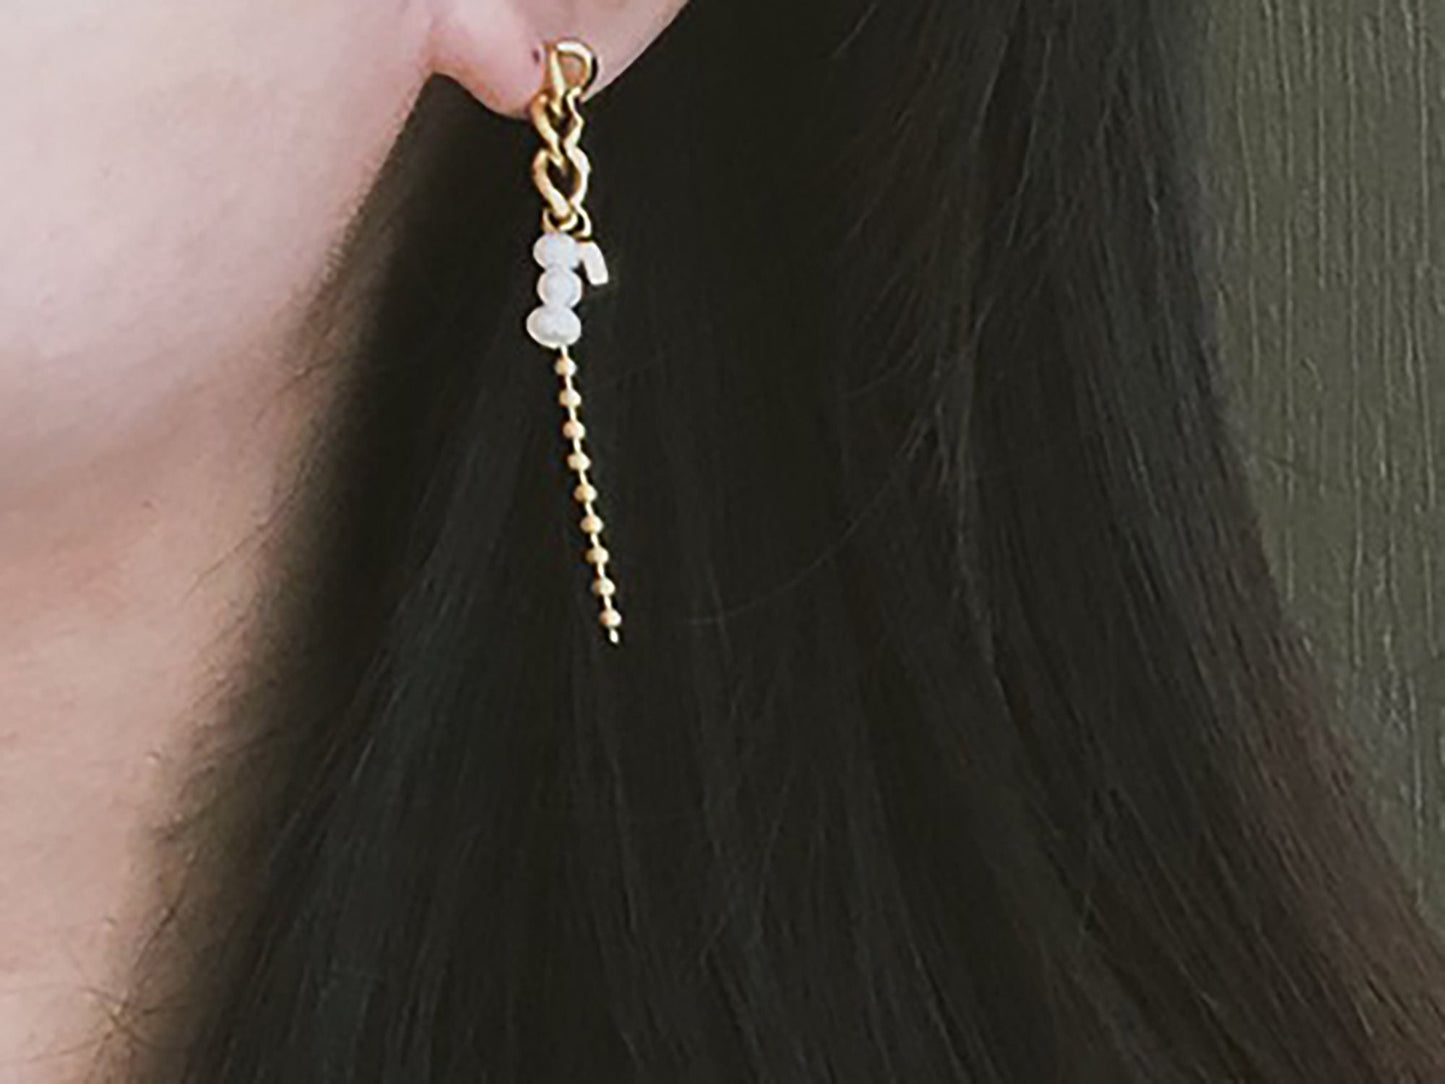 Titanium Real Pearl Mismatch Chain Dangle Earrings, Gold Plated, Hypoallergenic, Implant Grade Titanium Waterproof, Vintage Style, Minimal